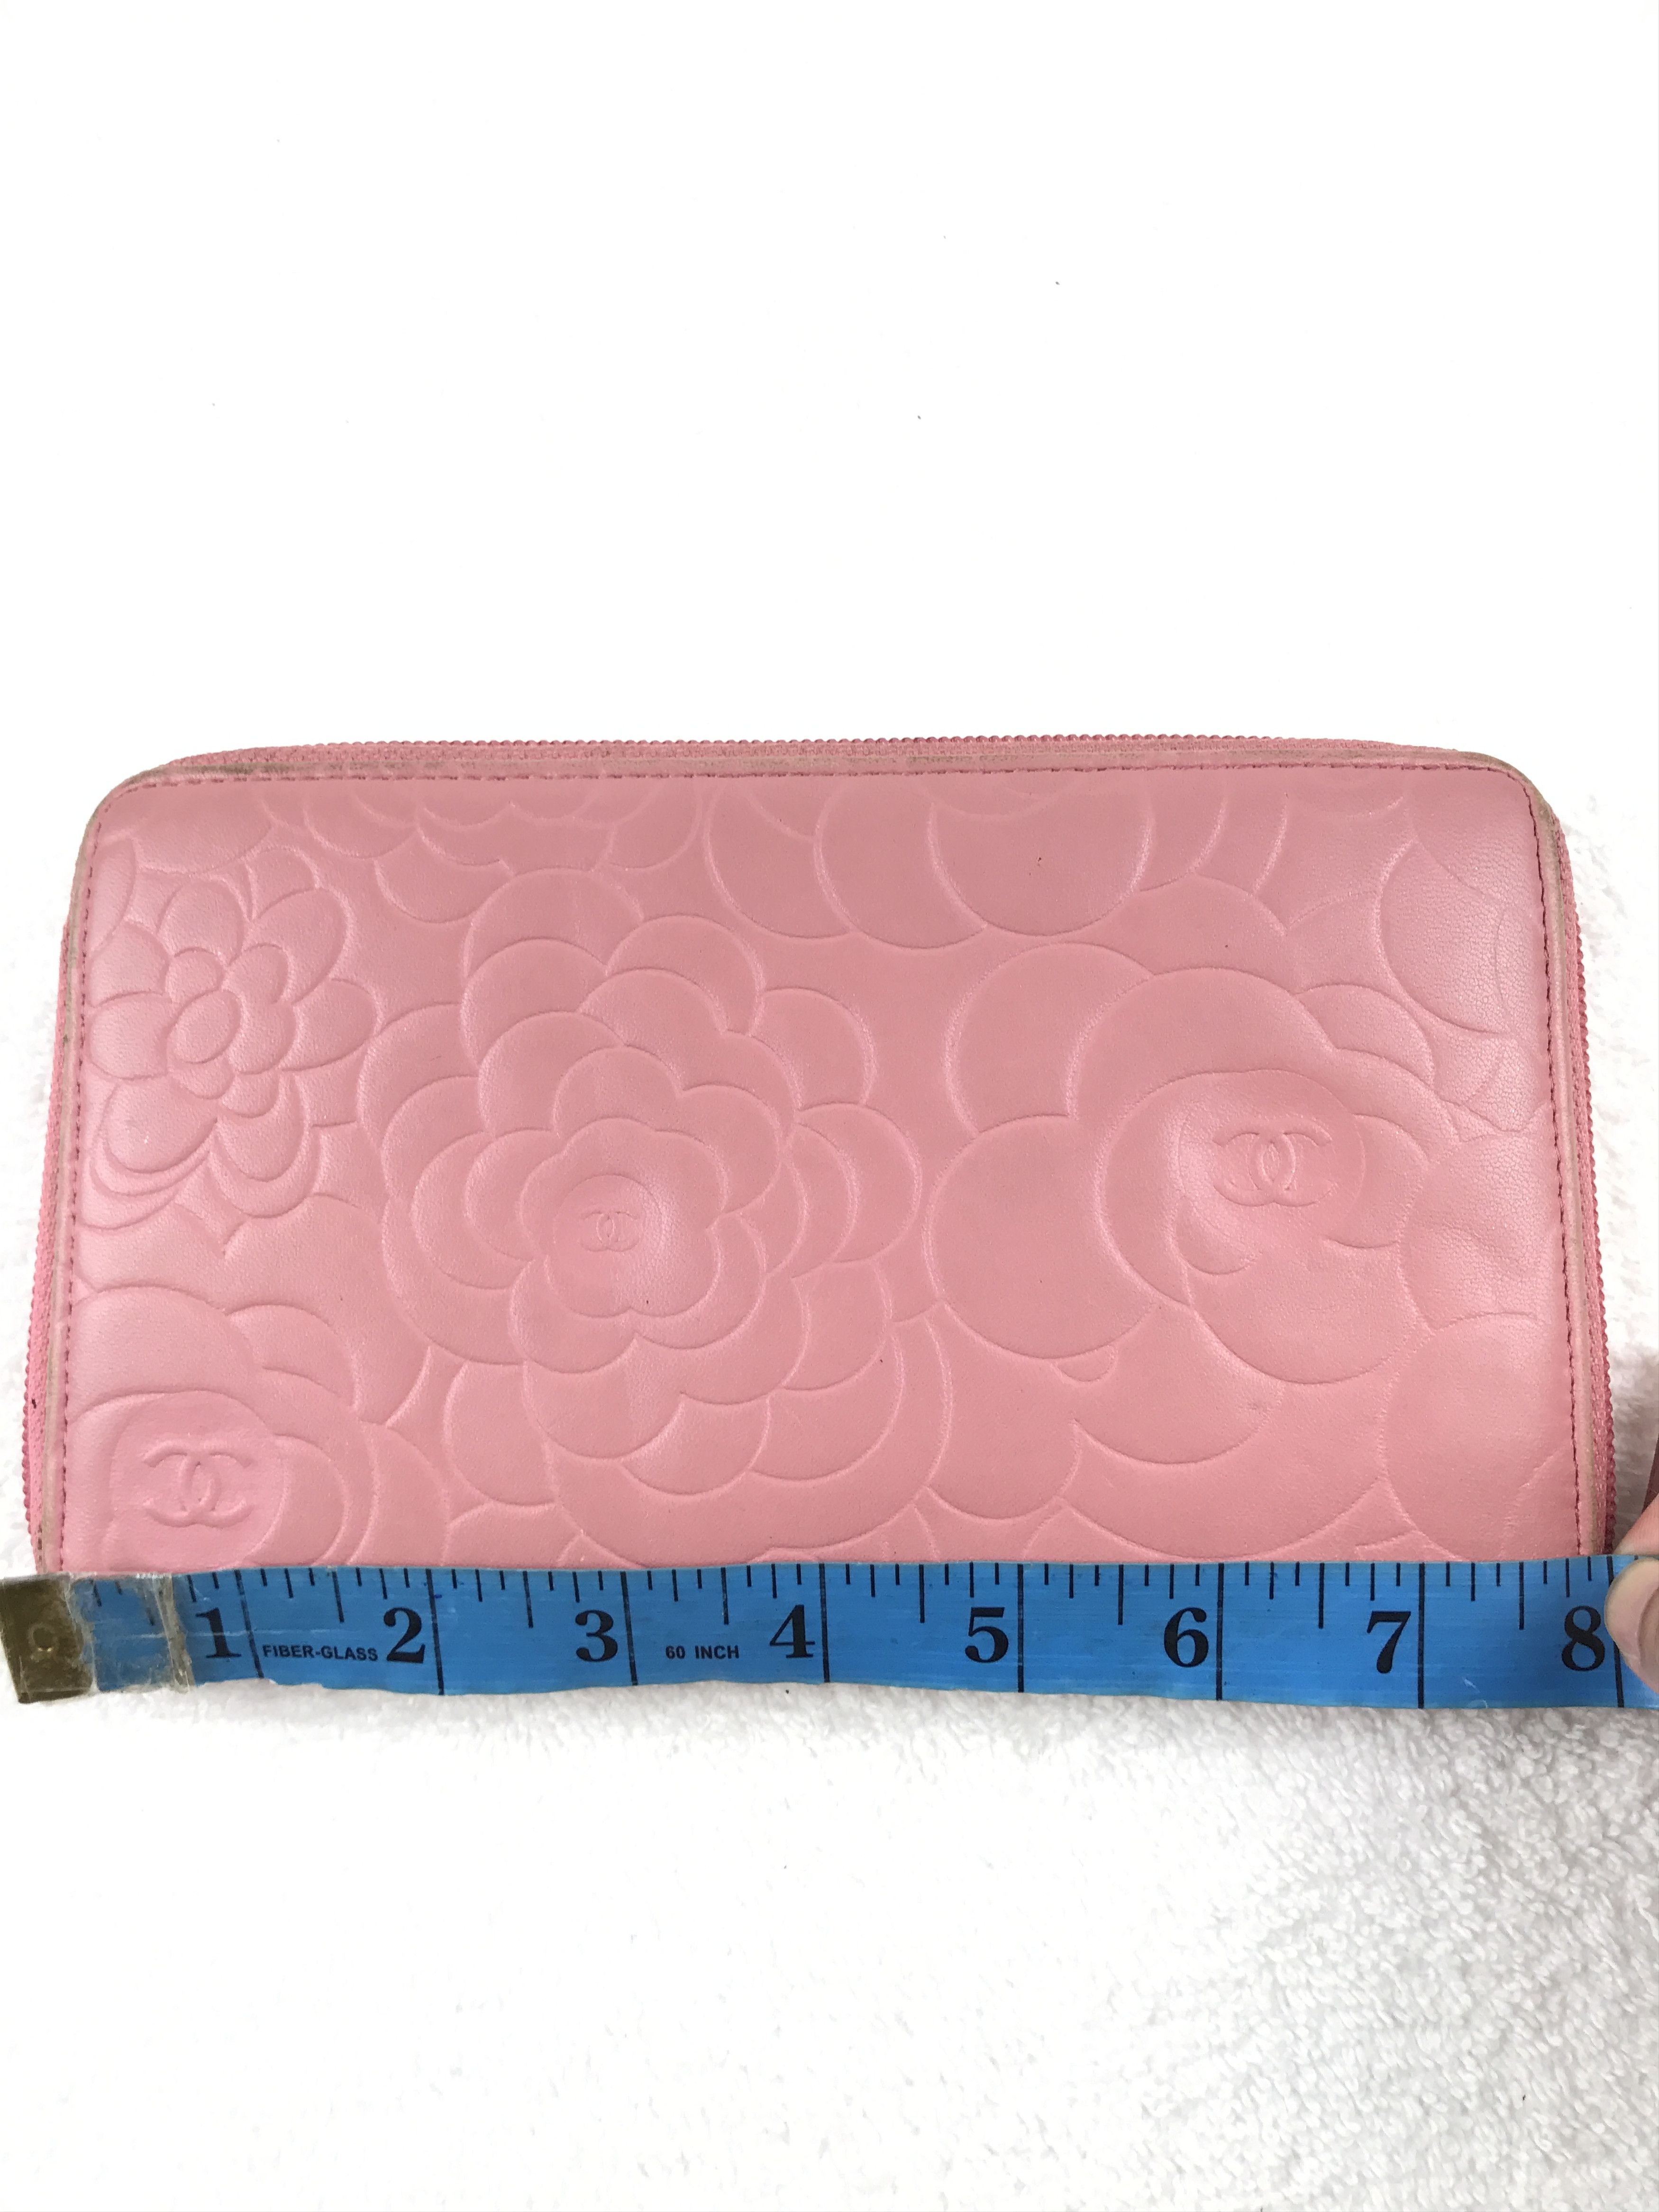 Vintage Chanel Pink Embossed Camellia Wallet Zip Around With Box | Grailed